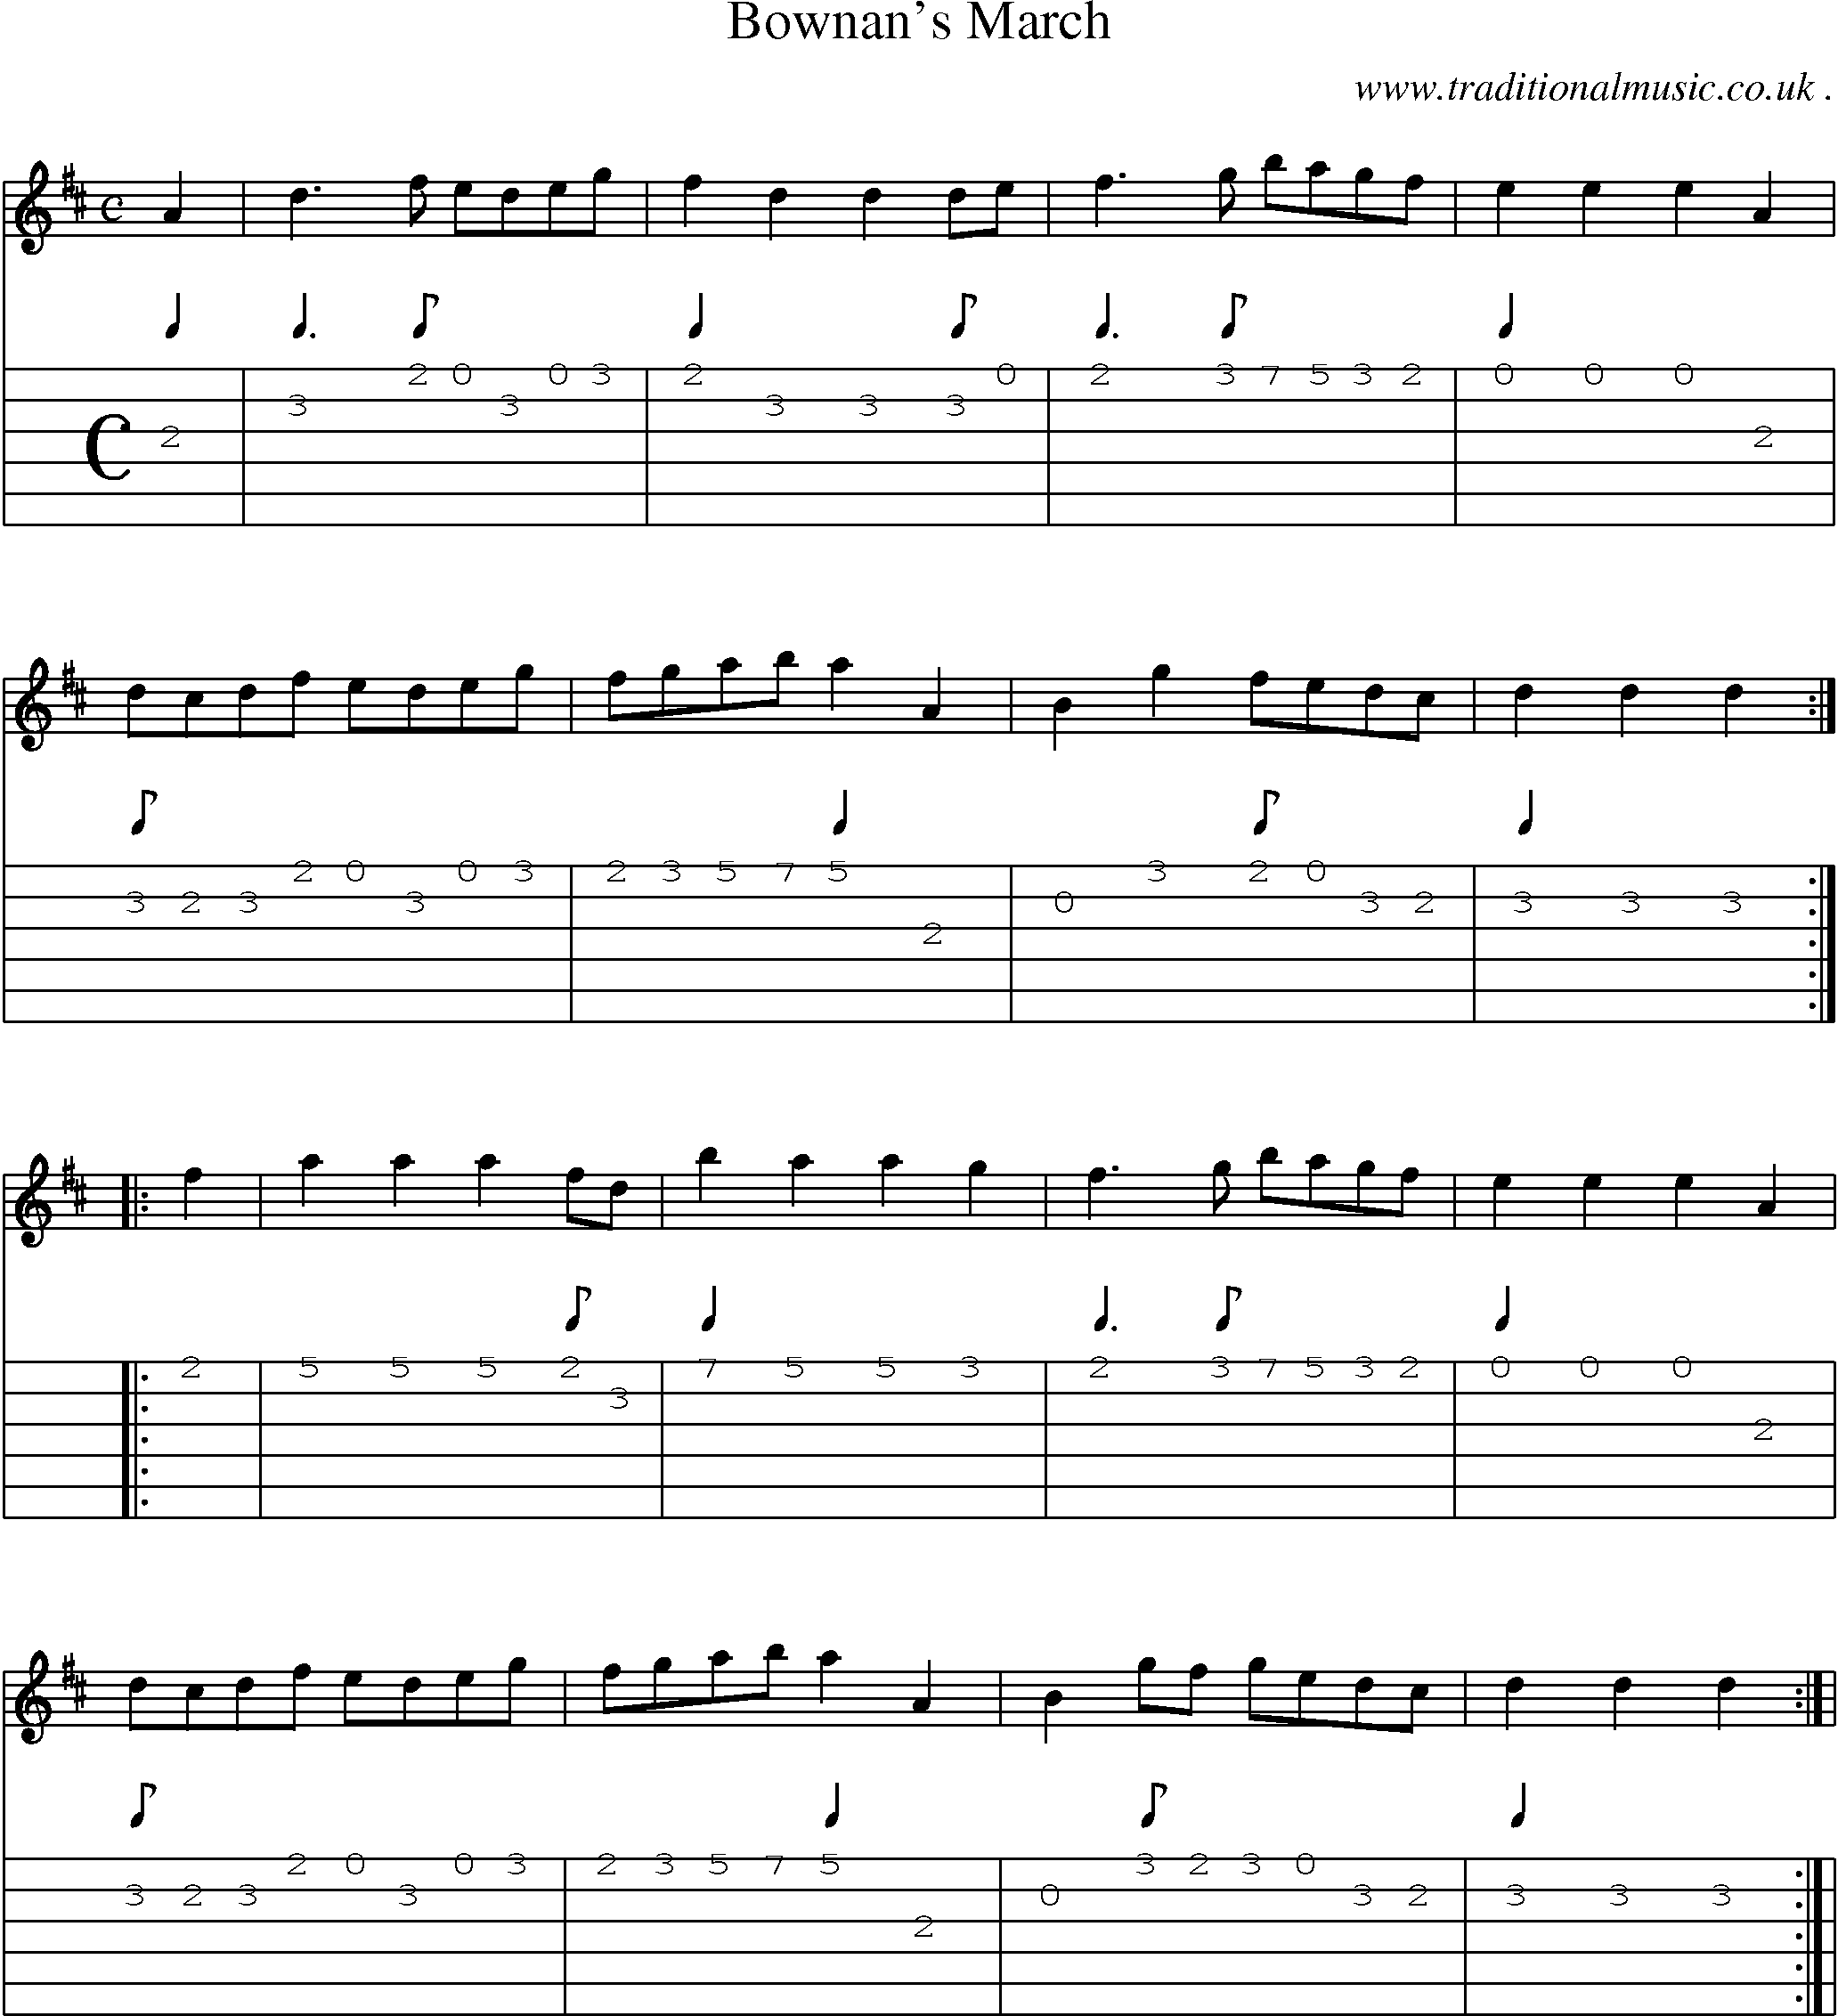 Sheet-Music and Guitar Tabs for Bownans March